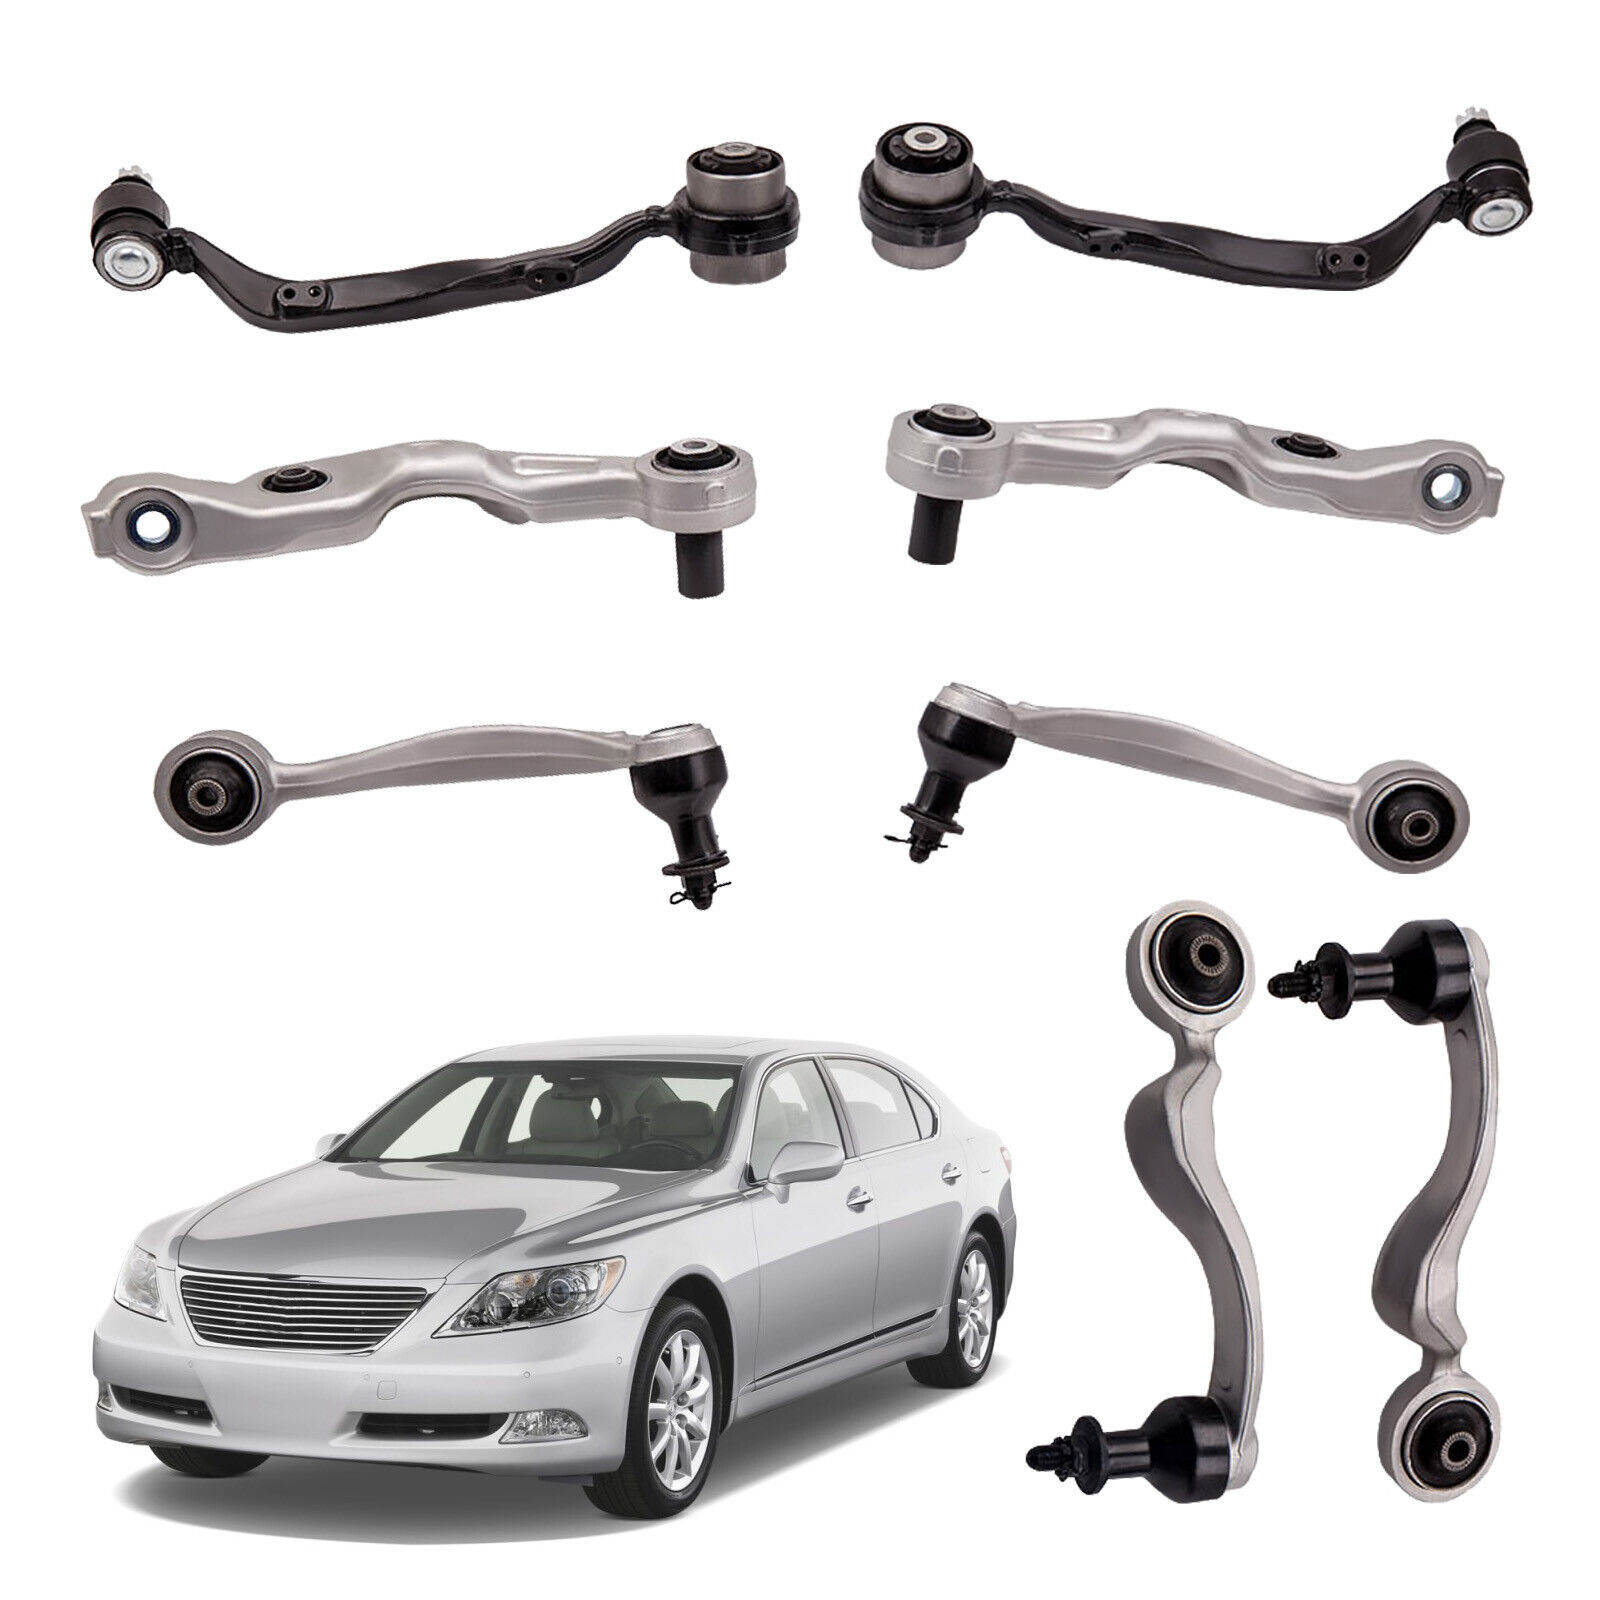 8x For 2007-2017 Lexus LS460 RWD Suspension Front Upper & Lower Control Arm Kit